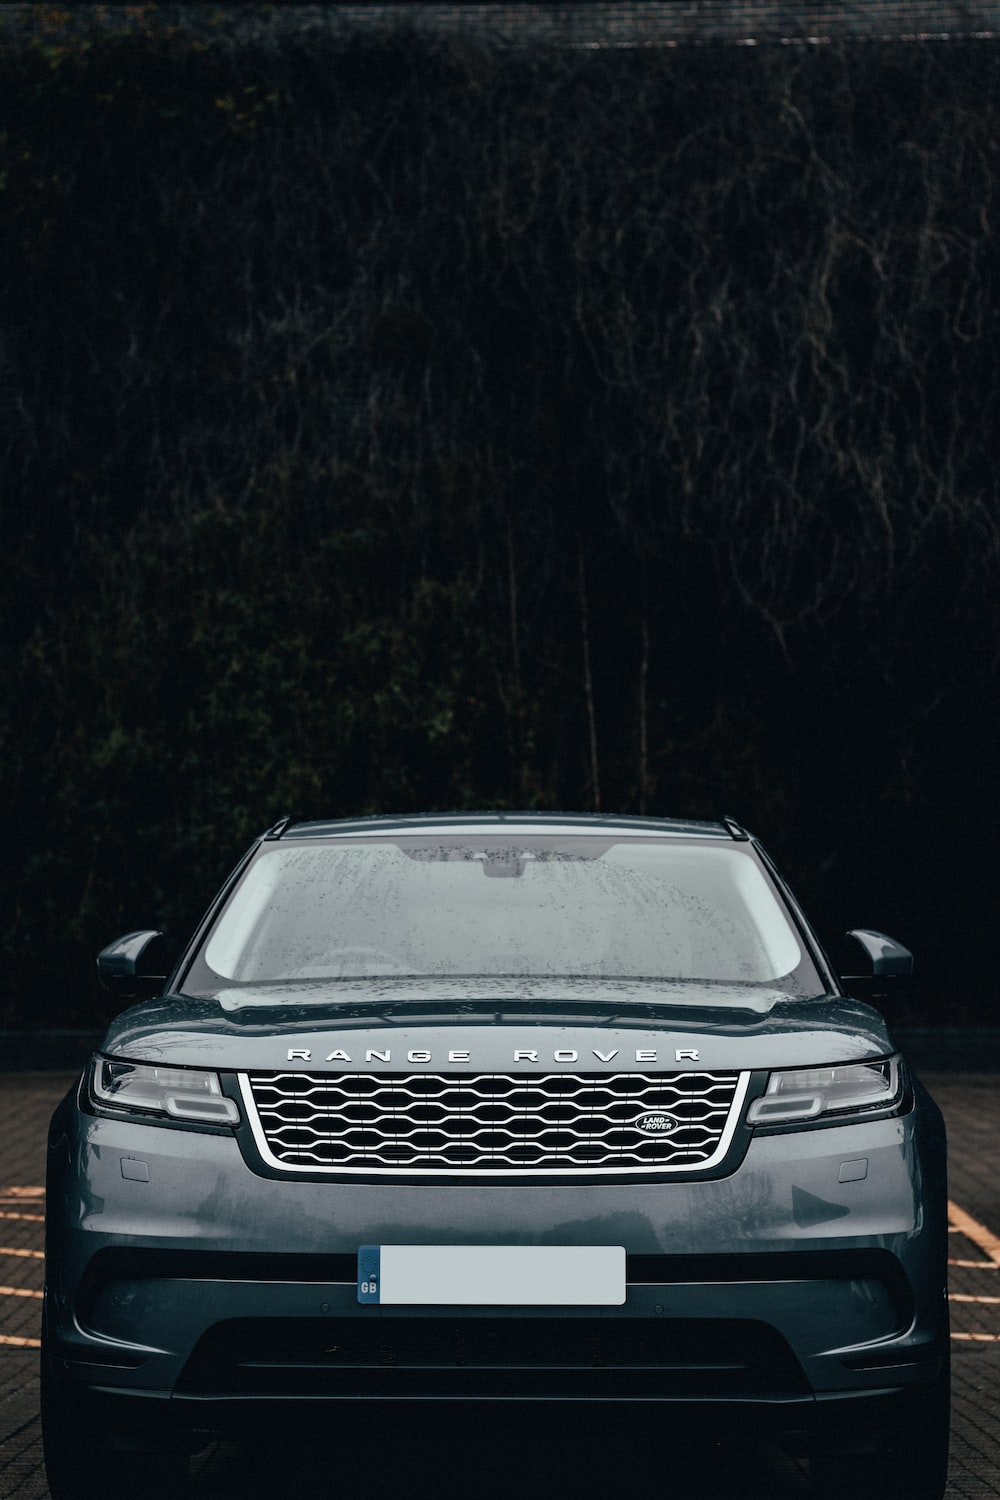 Range Rover Pictures Image